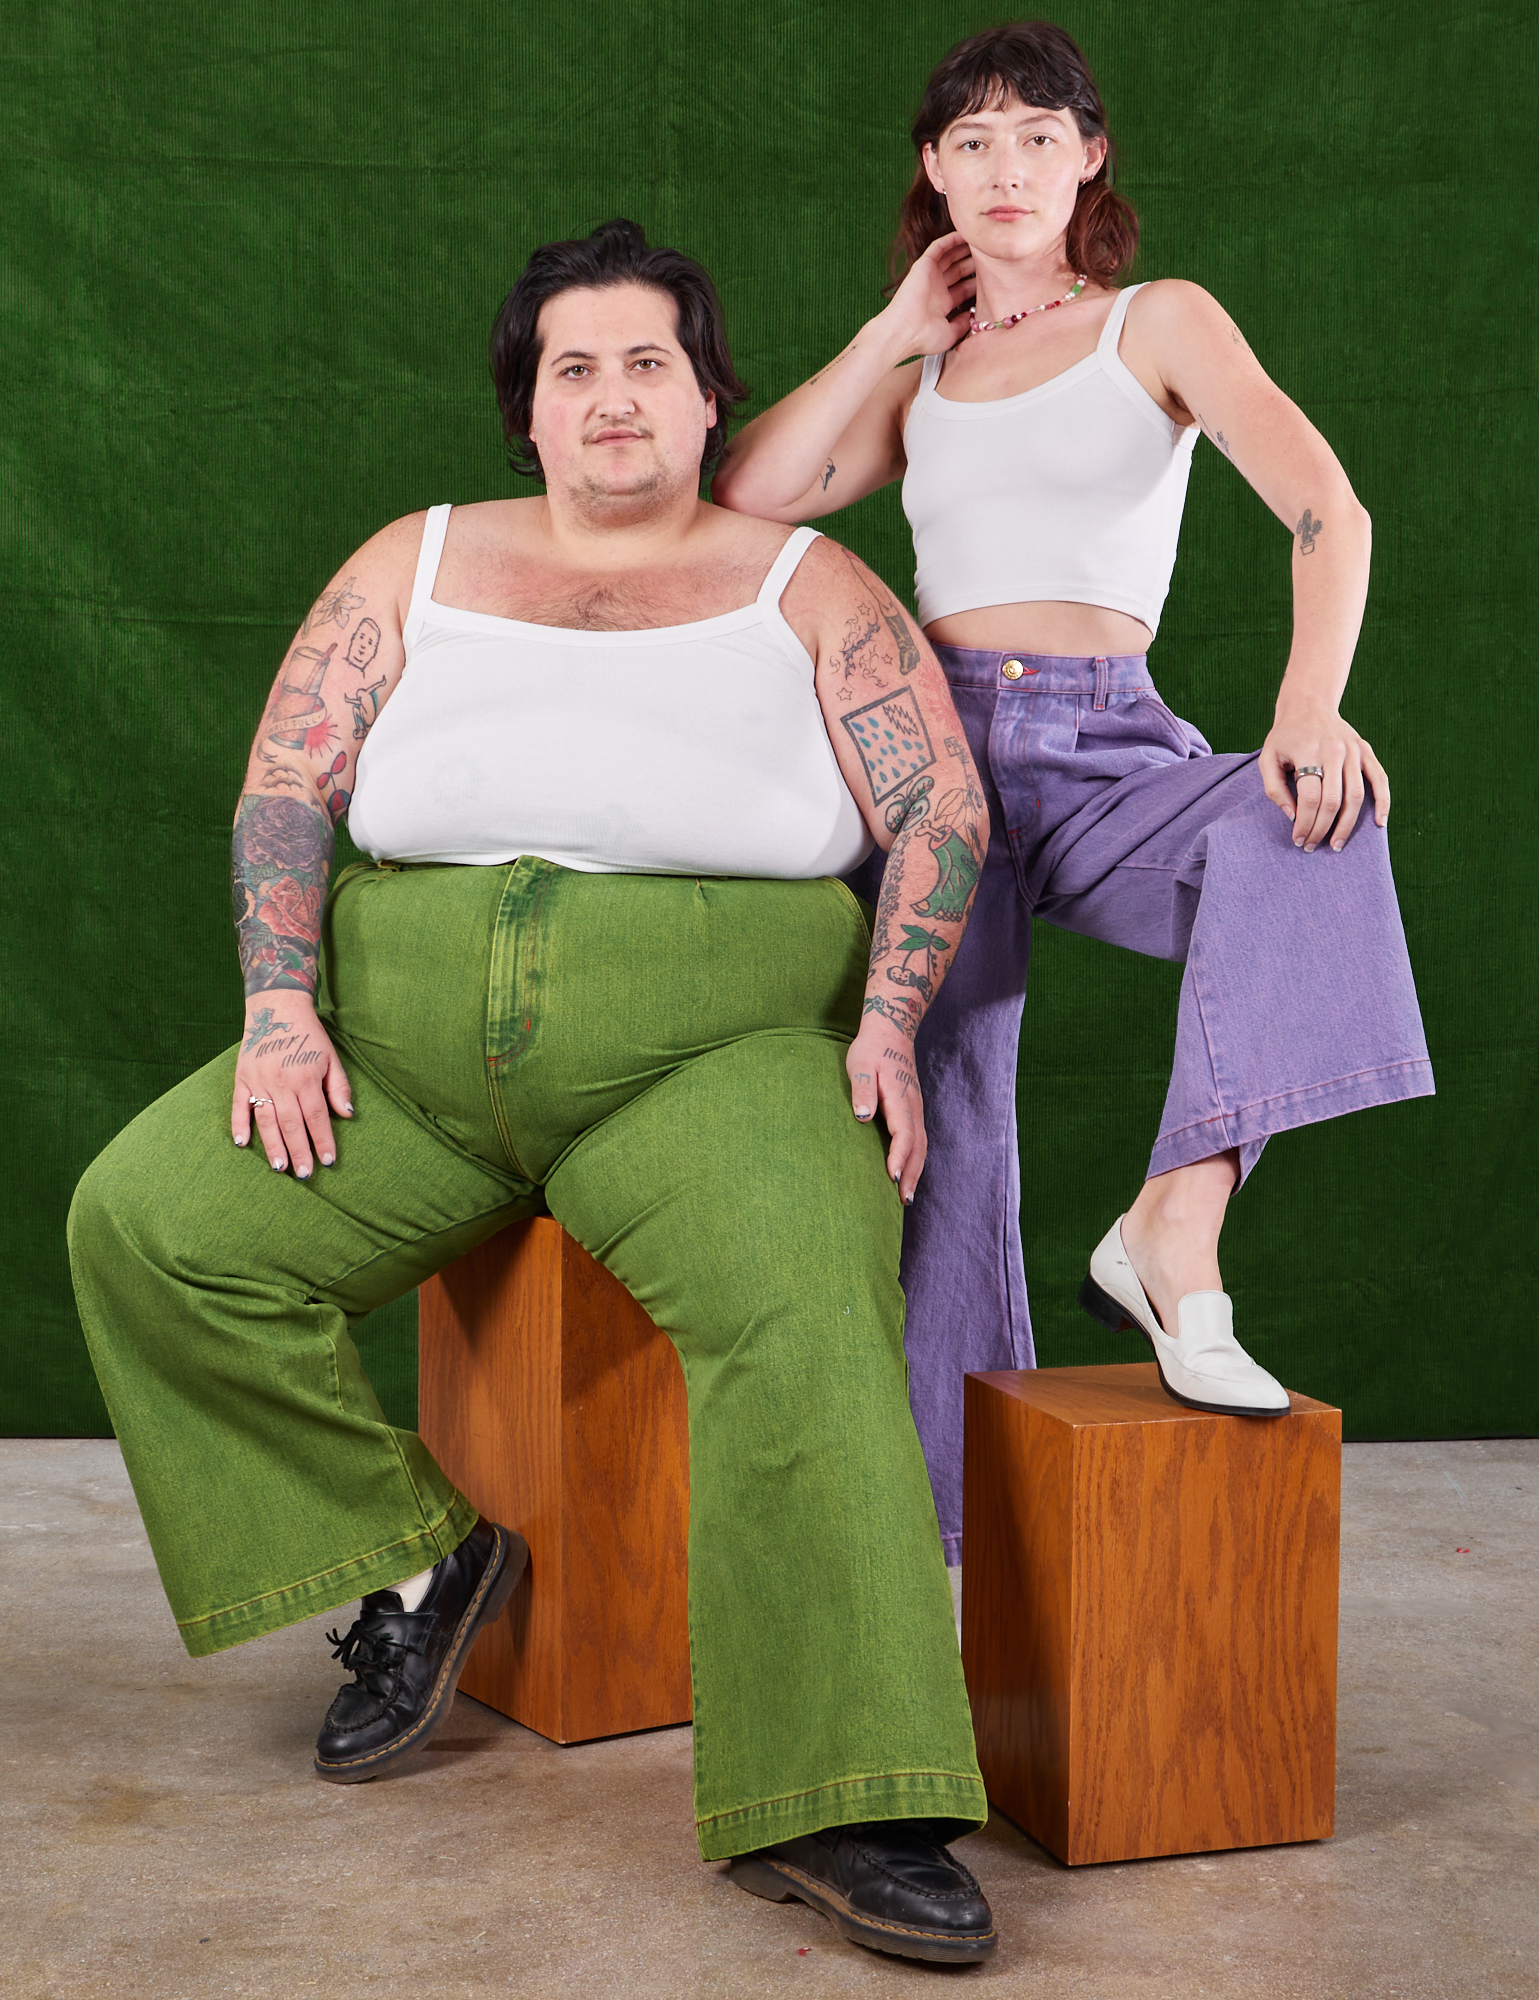 Sam is wearing Overdyed Wide Leg Trousers in Gross Green and vintage off-white Cami. Alex is standing behind them wearing Overdyed Wide Leg Trousers in Faded Grape